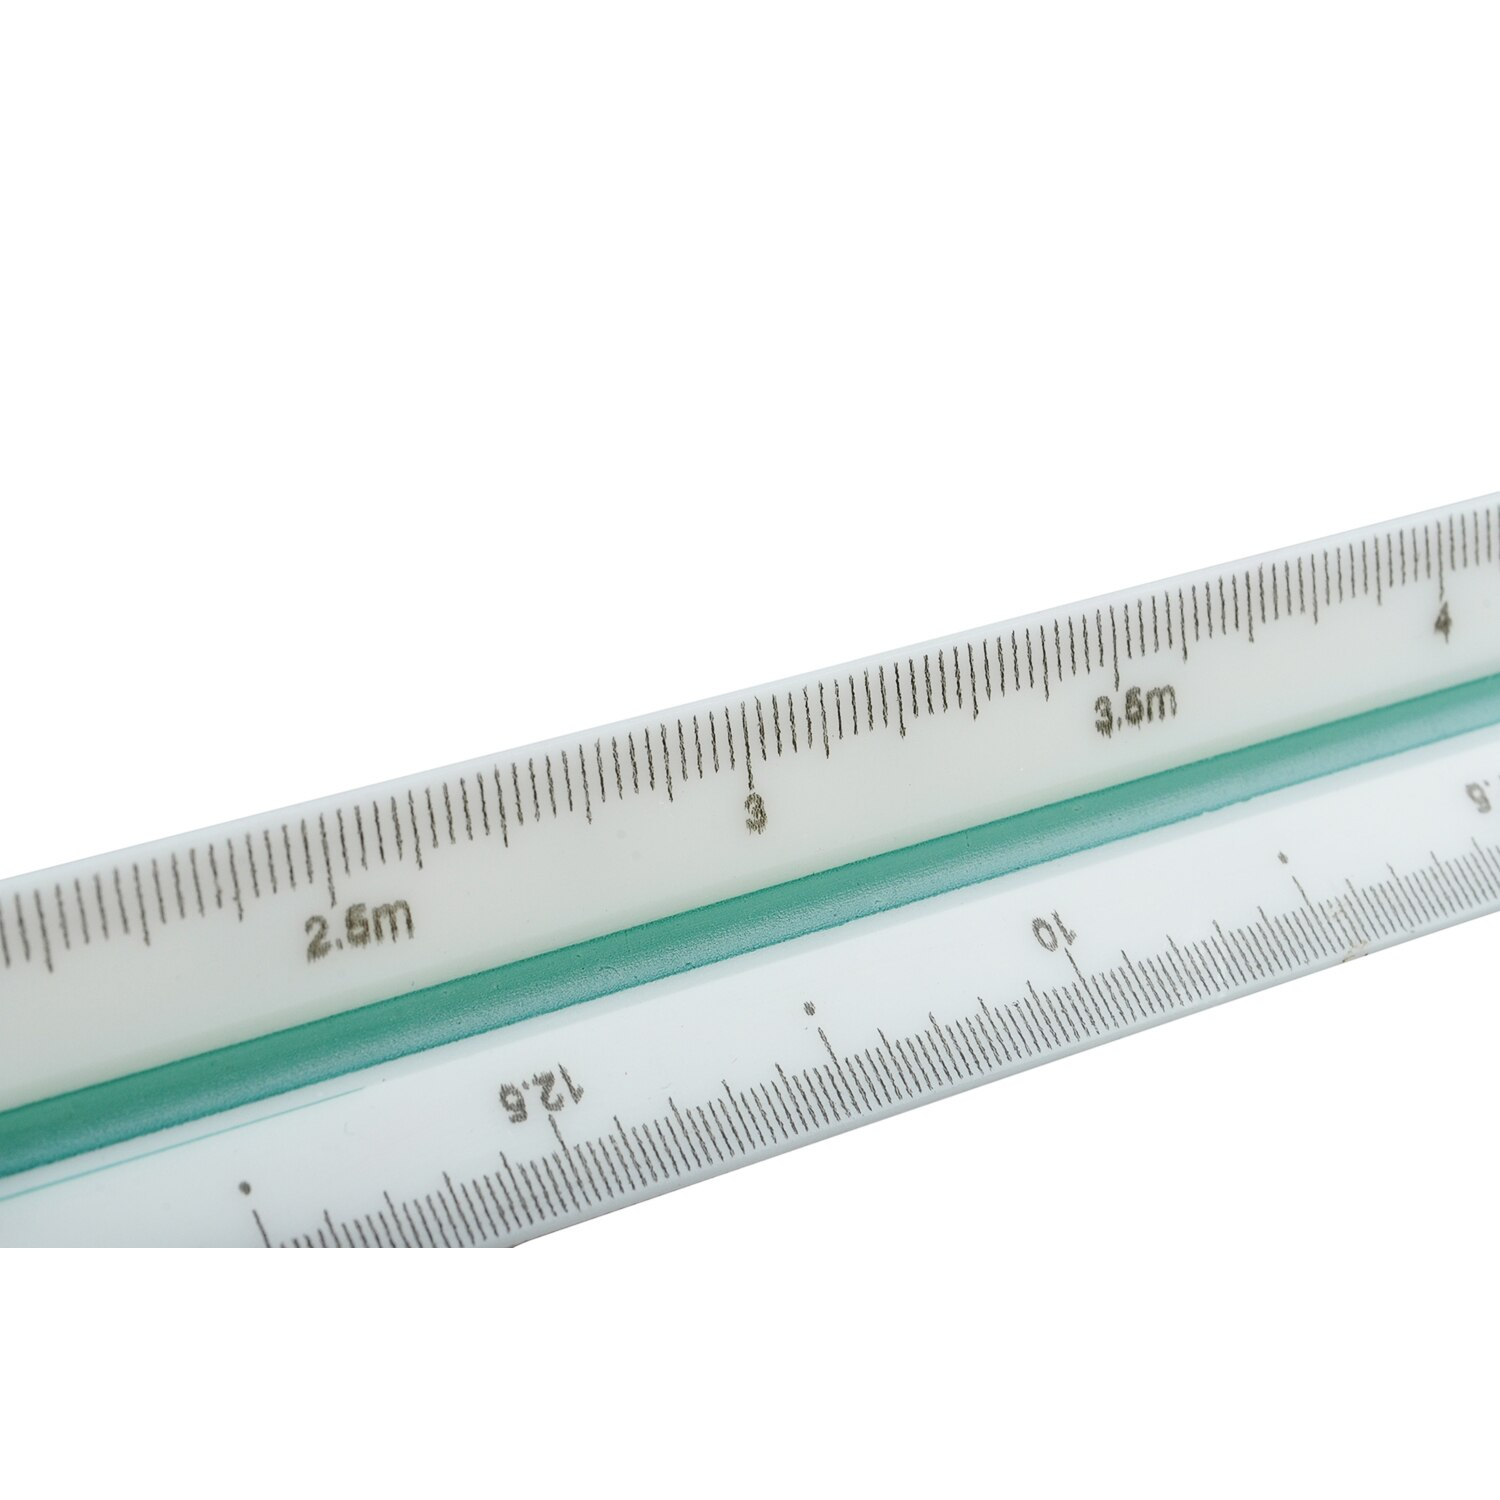 Engineer Metric Triangular Scale Ruler With Multiple Scale